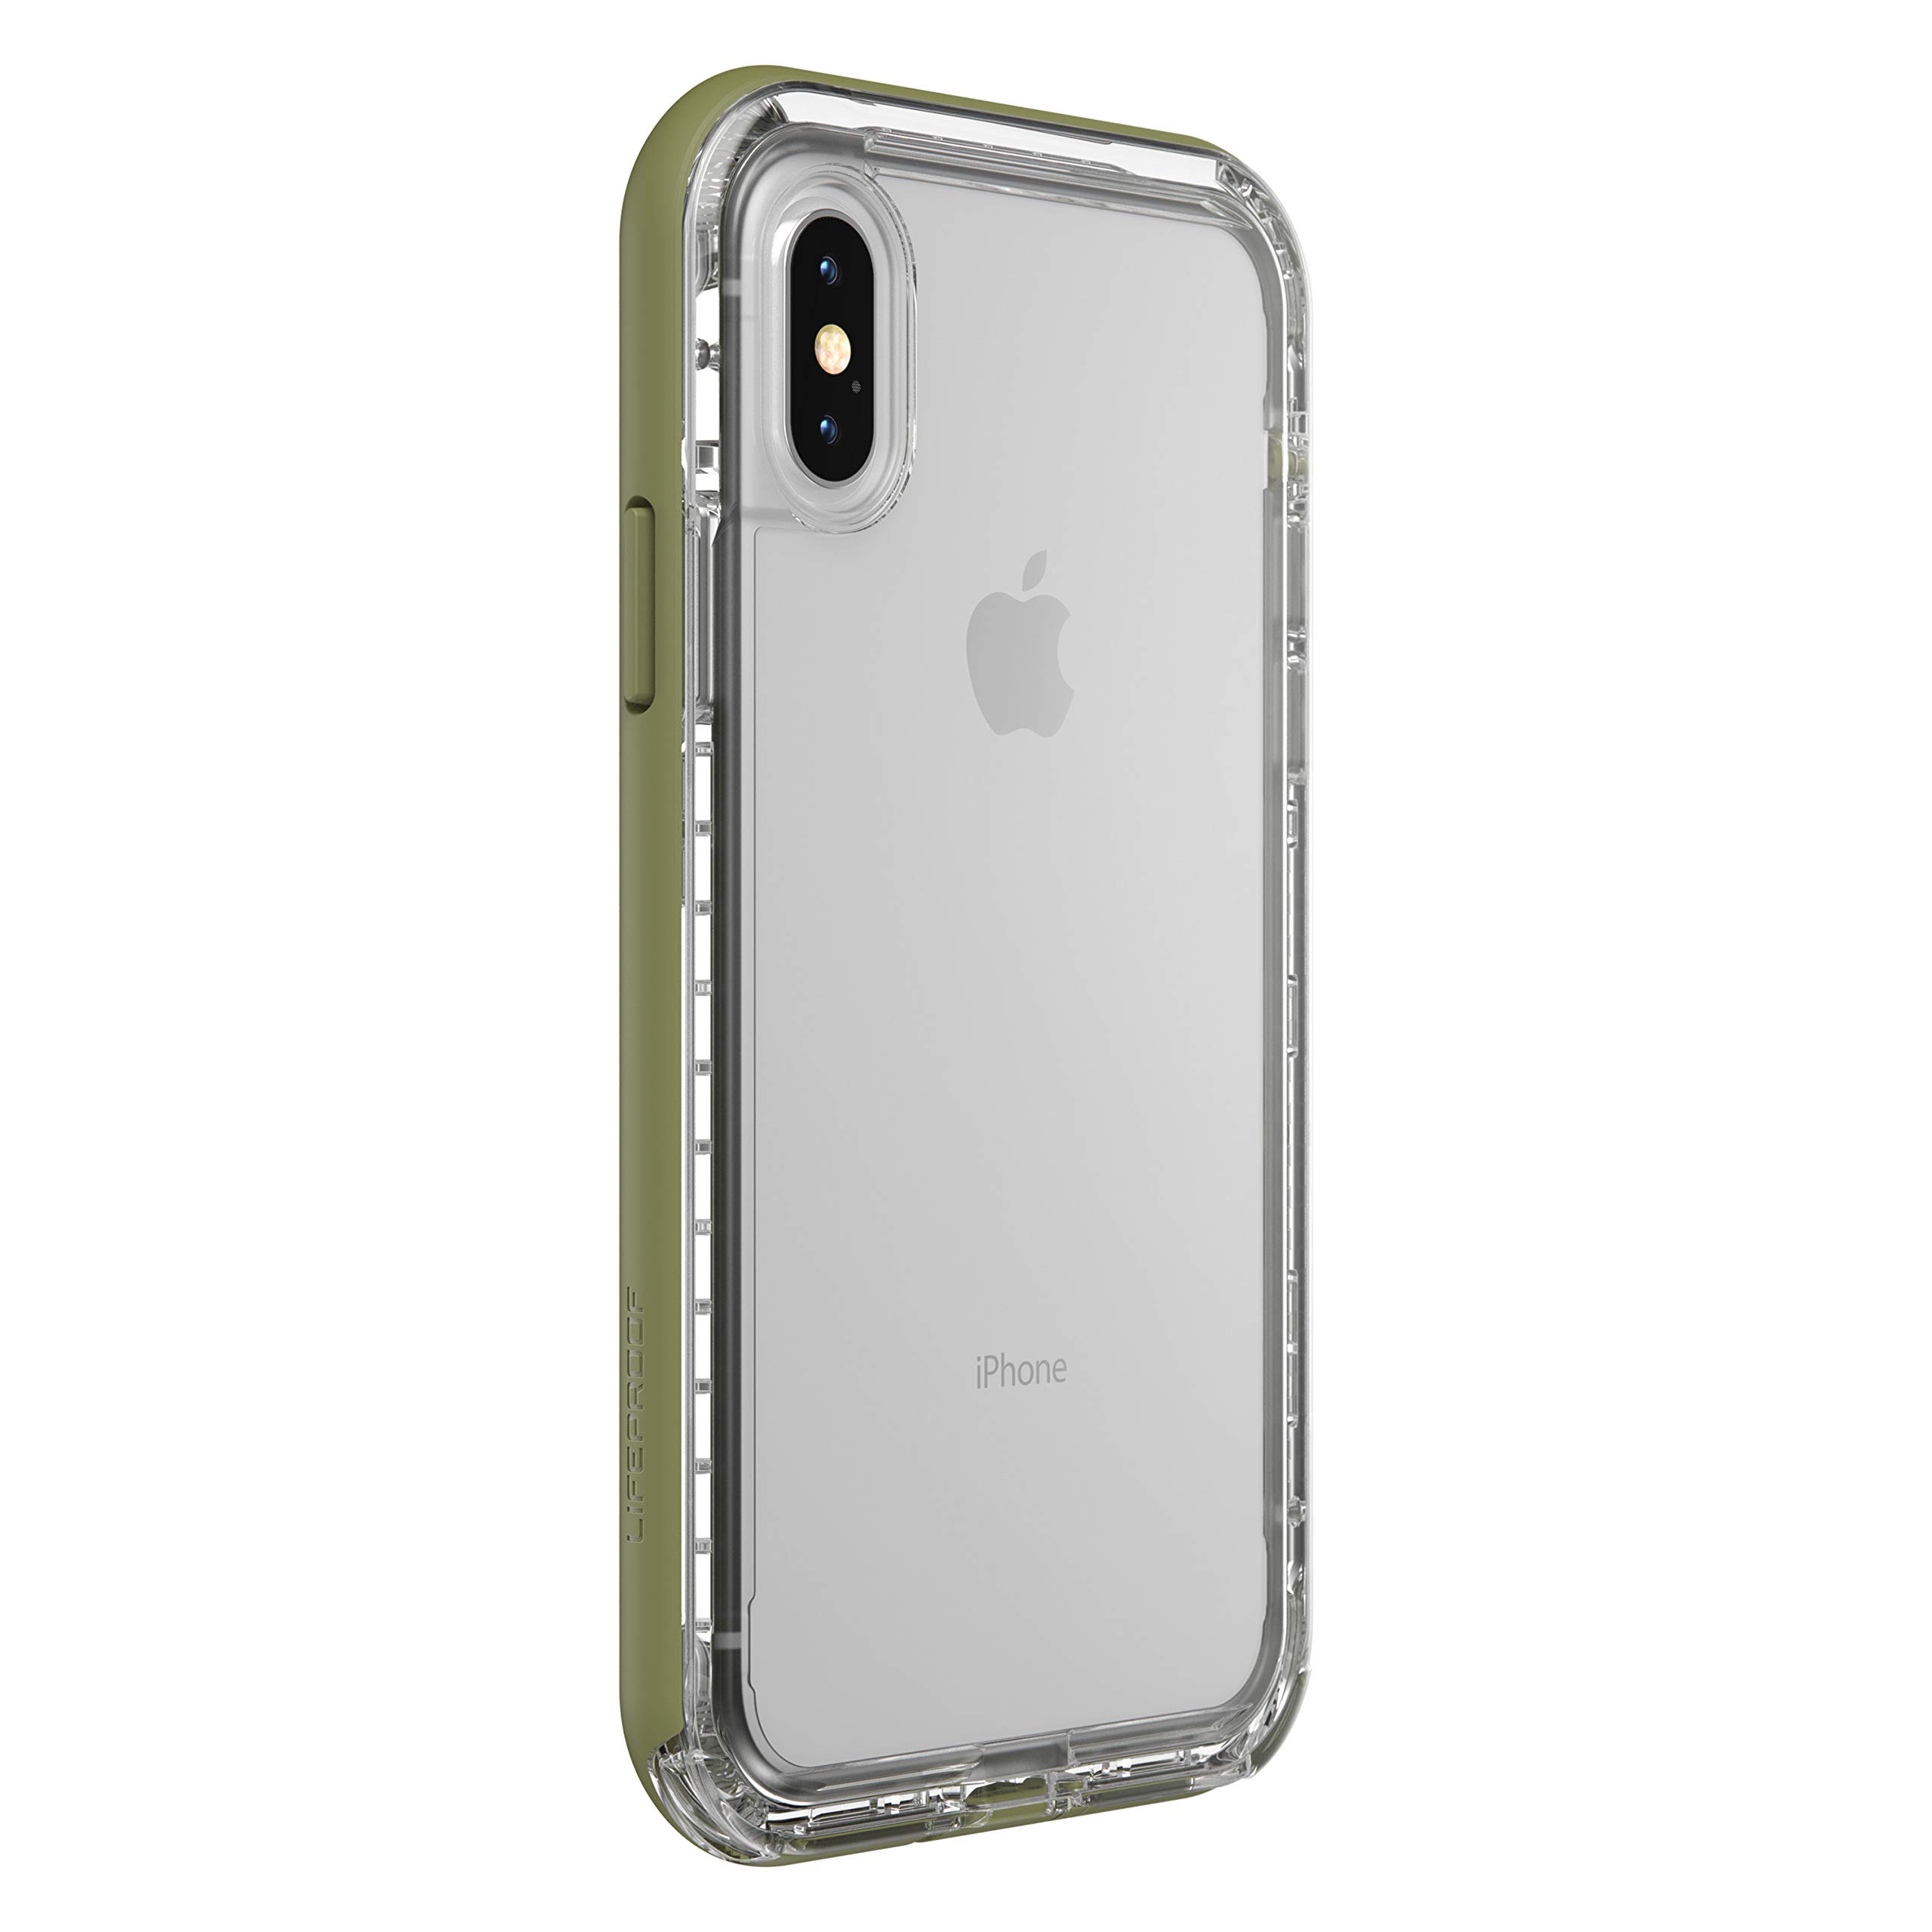 LifeProof Next Series Case for iPhone Xs & iPhone X (NOT XR/XS MAX) Non-Retail Packaging - Zipline